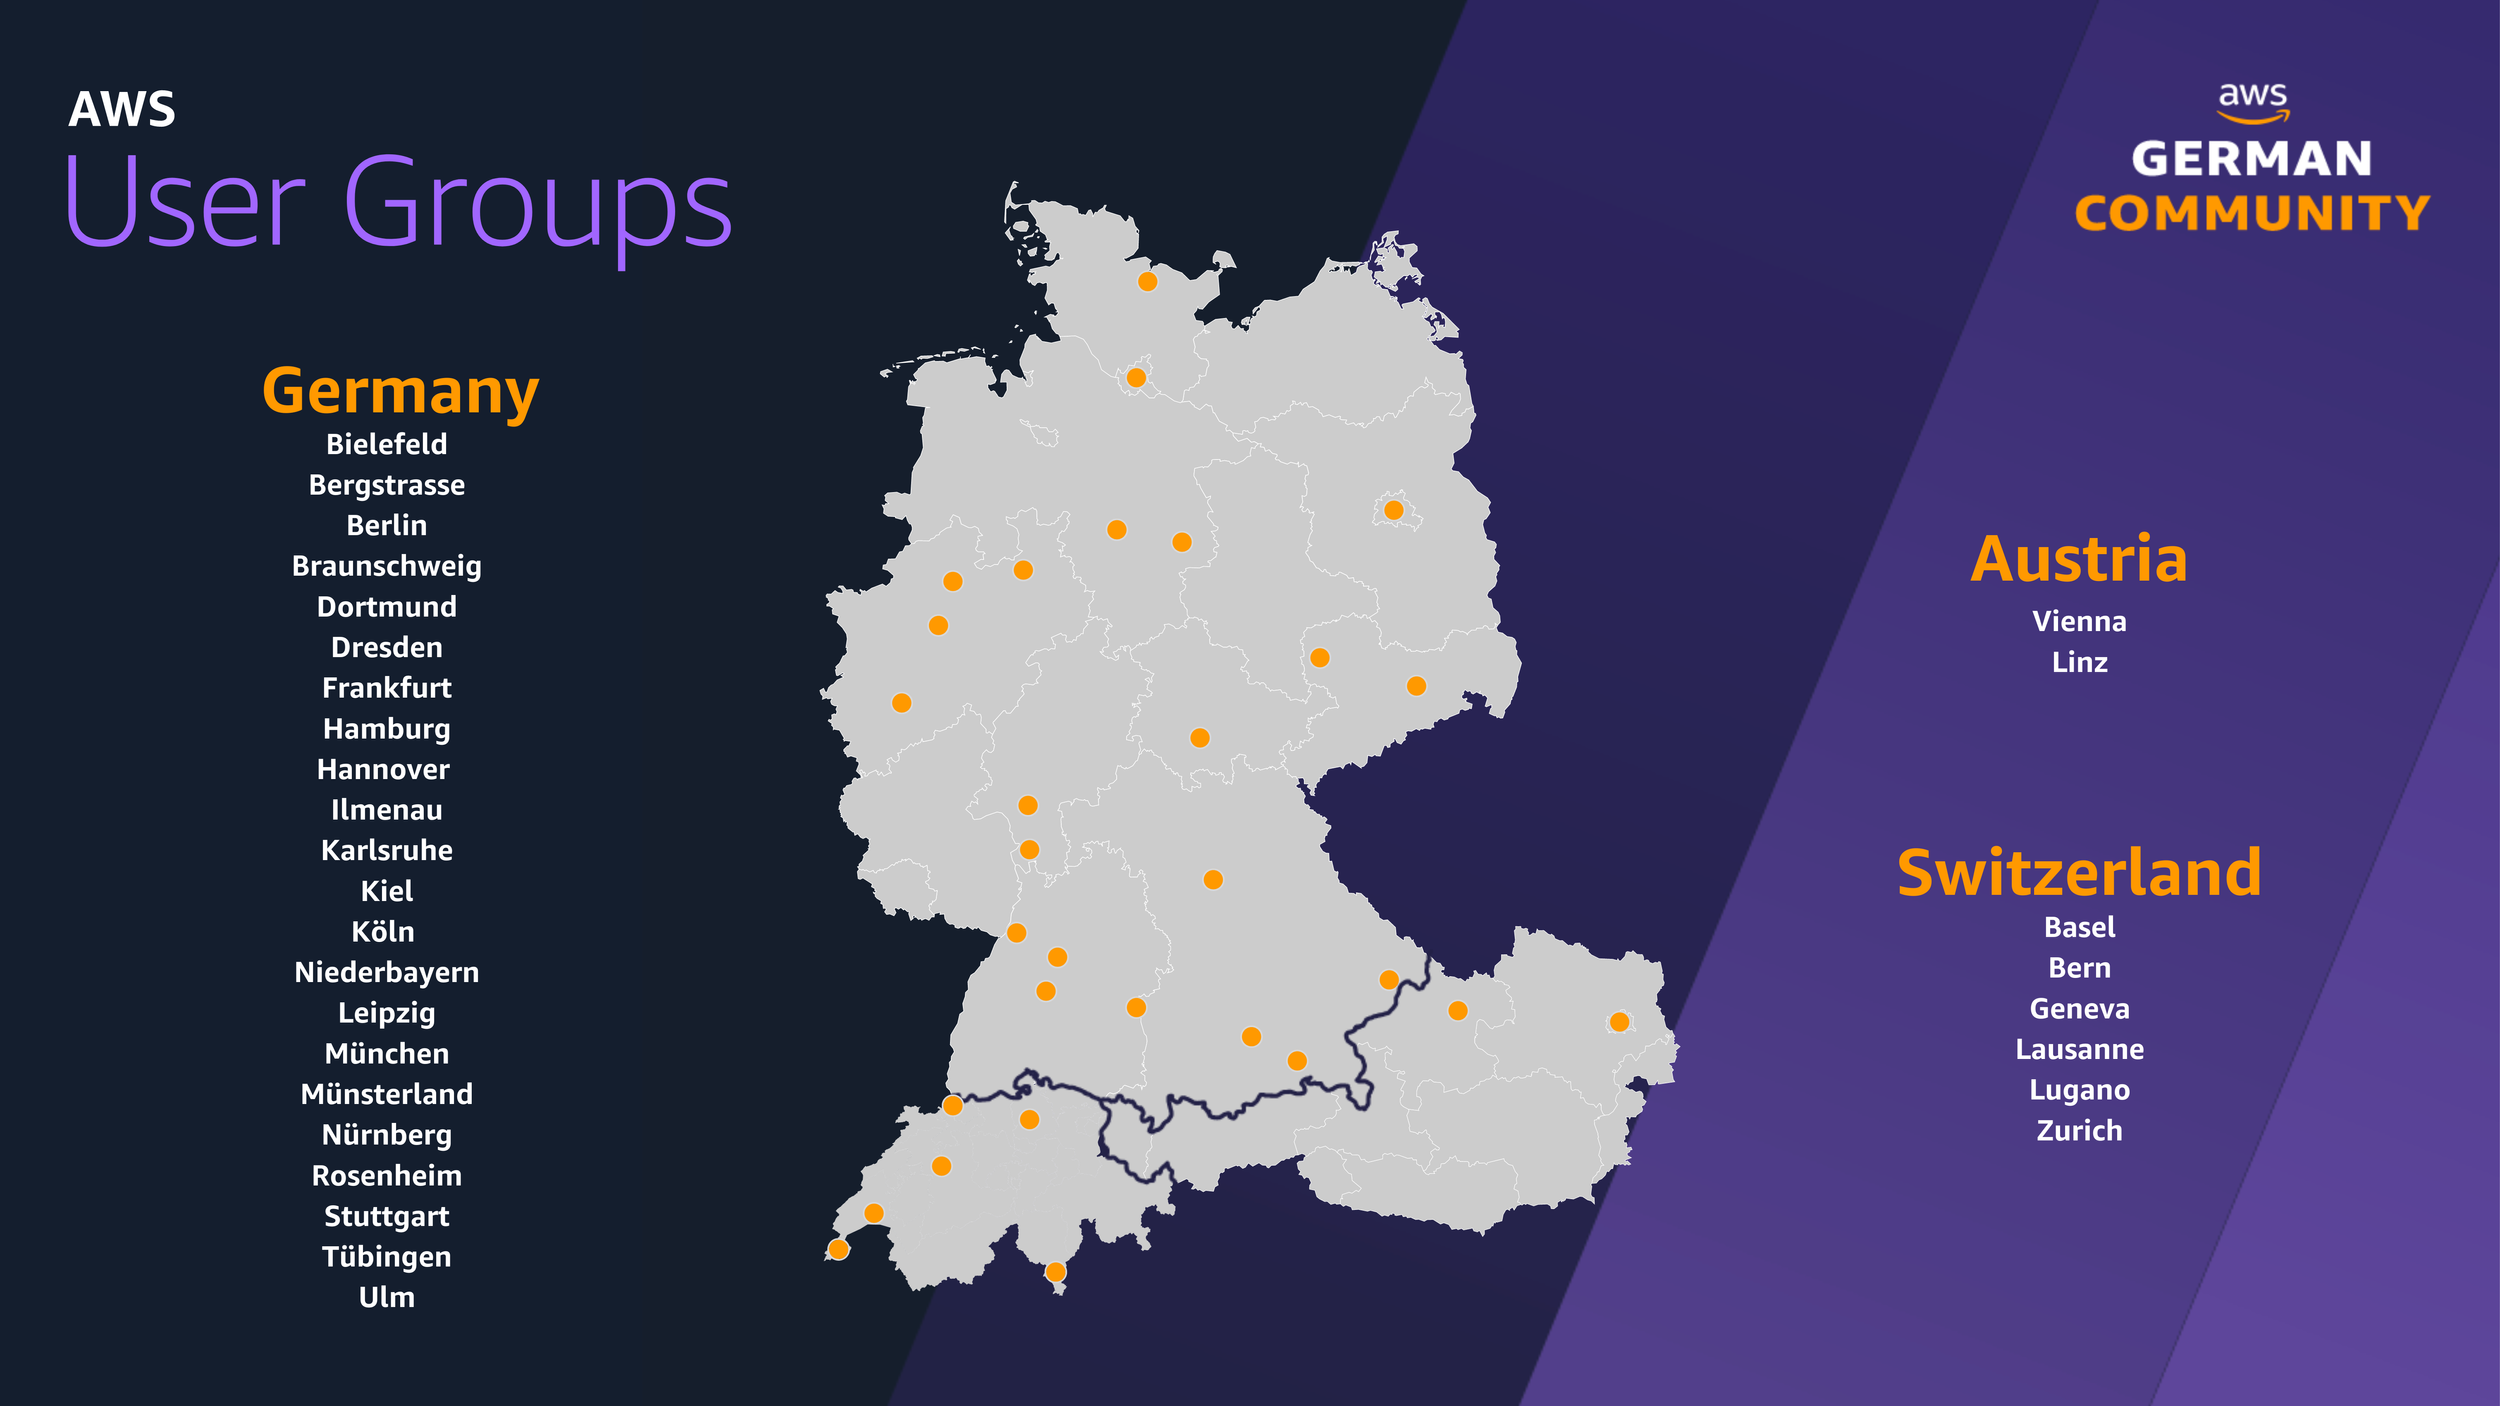 AWS UserGroups in DACH